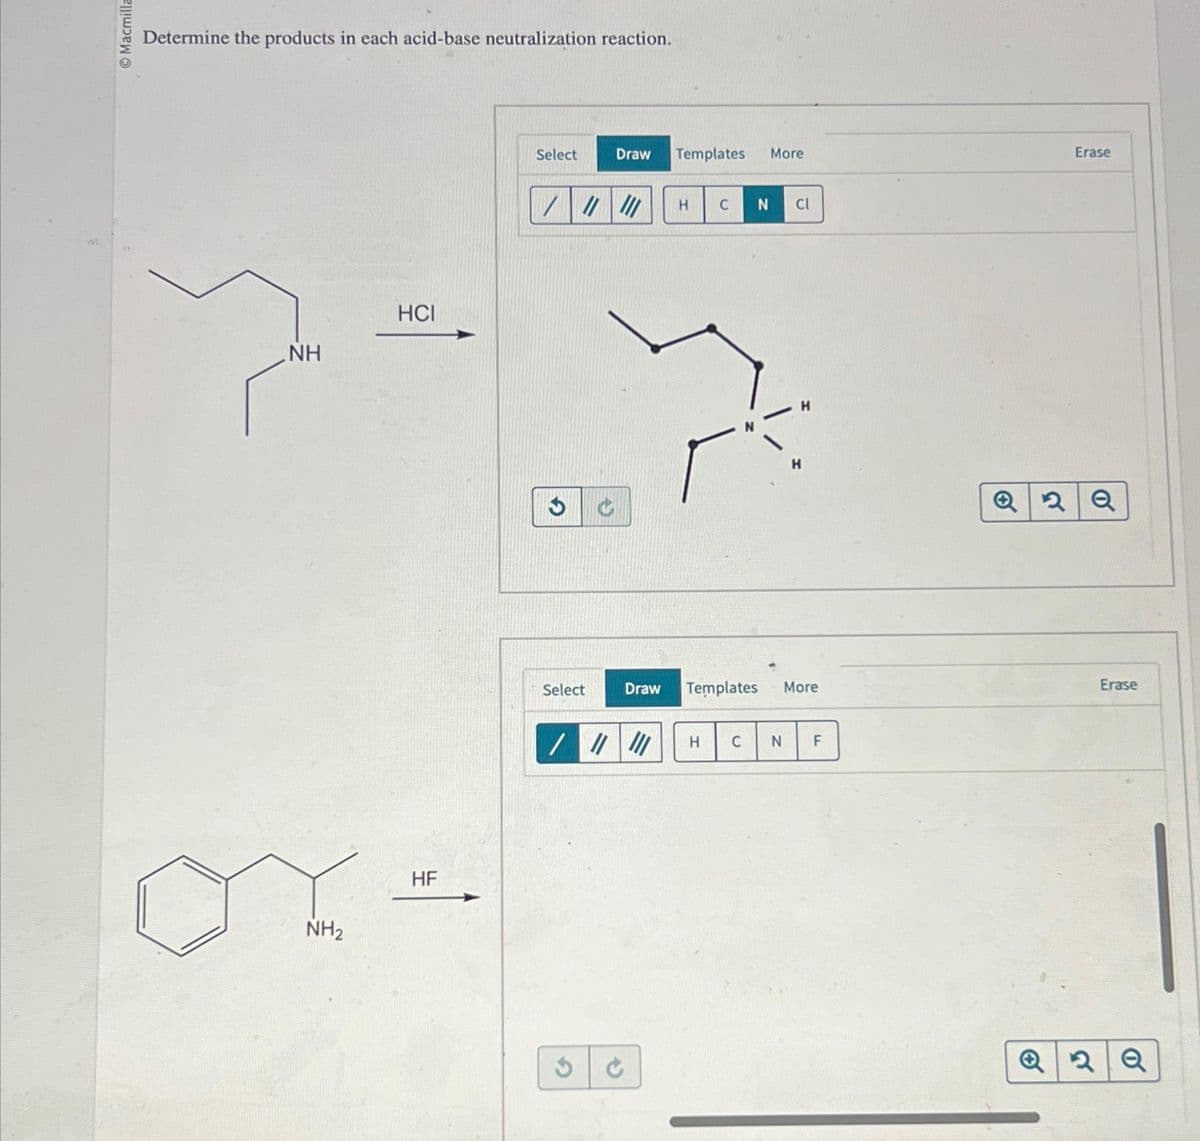 Macmilla
Determine the products in each acid-base neutralization reaction.
NH
NH₂
HCI
HF
Select
////// H C N Cl
Select
Draw Templates More
3
Draw Templates
||||||
///
C
H C N
More
F
Erase
Q2Q
Erase
Q2Q